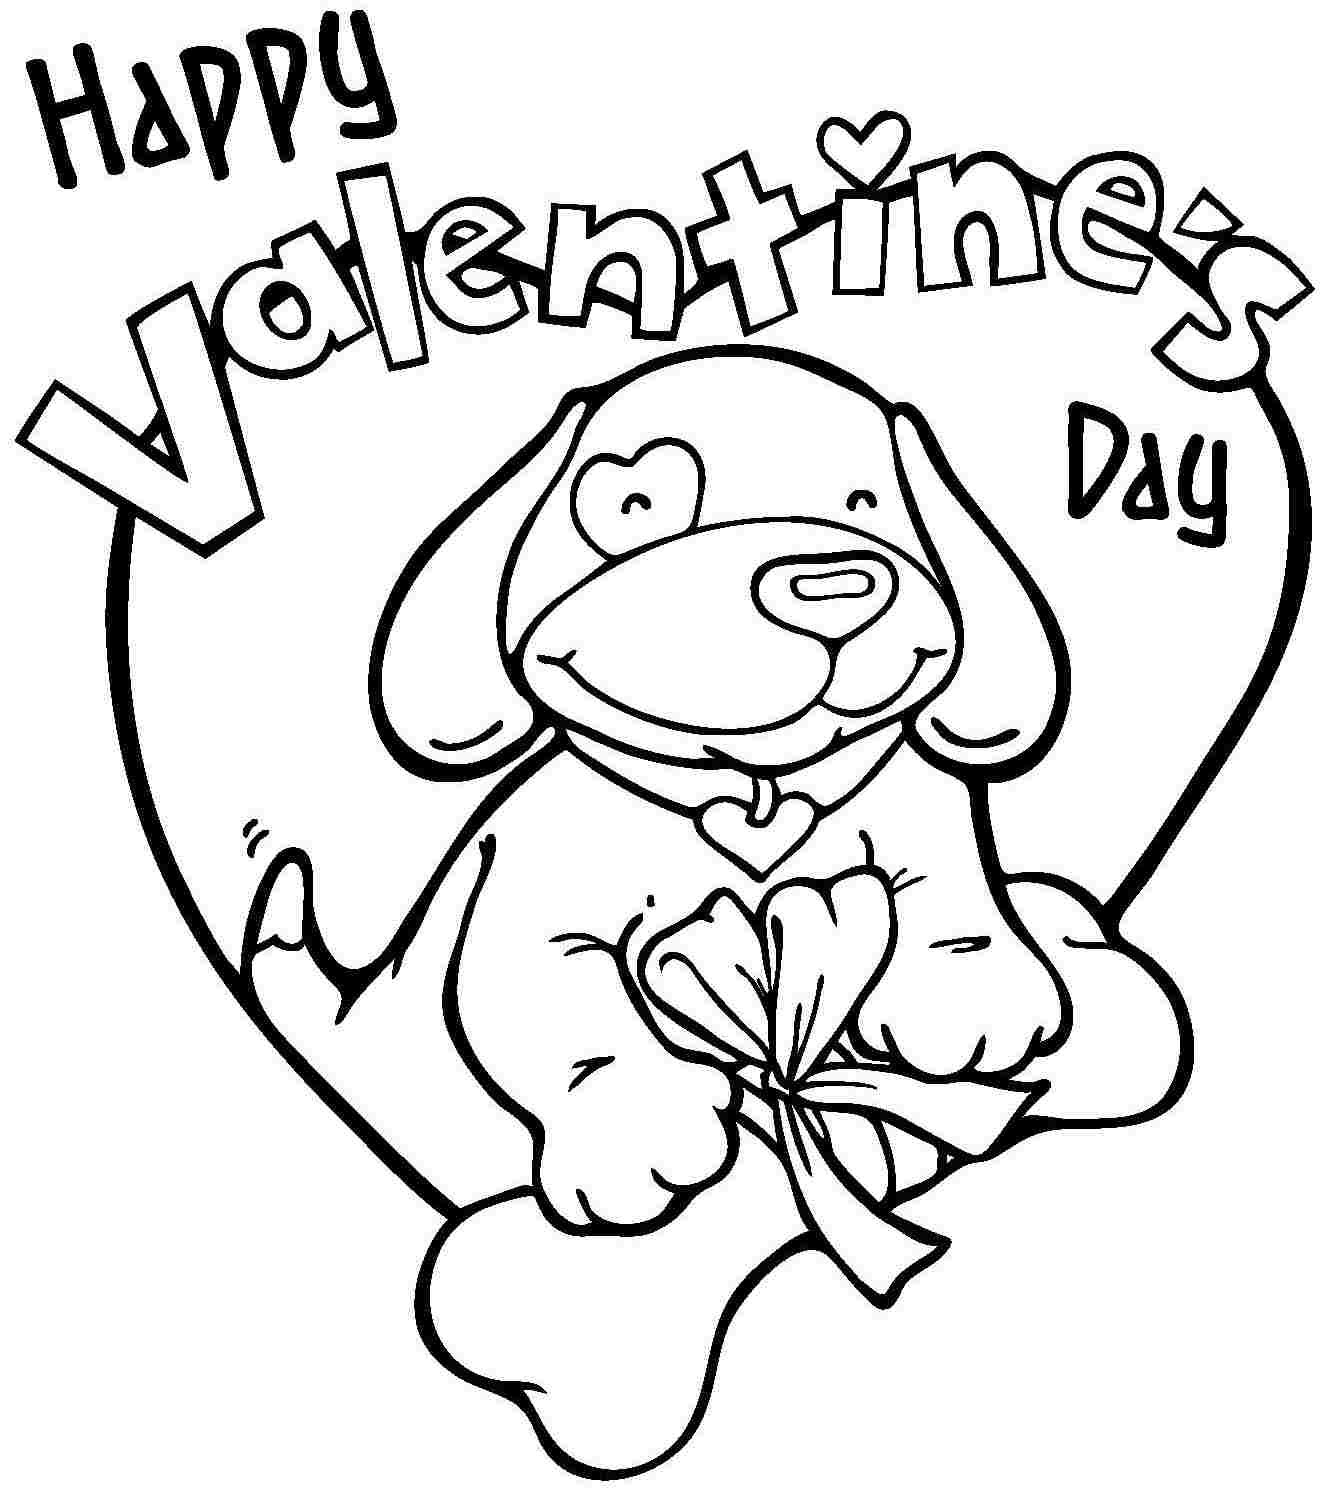 Dinosaur Valentine Coloring Pages at GetColorings.com | Free printable